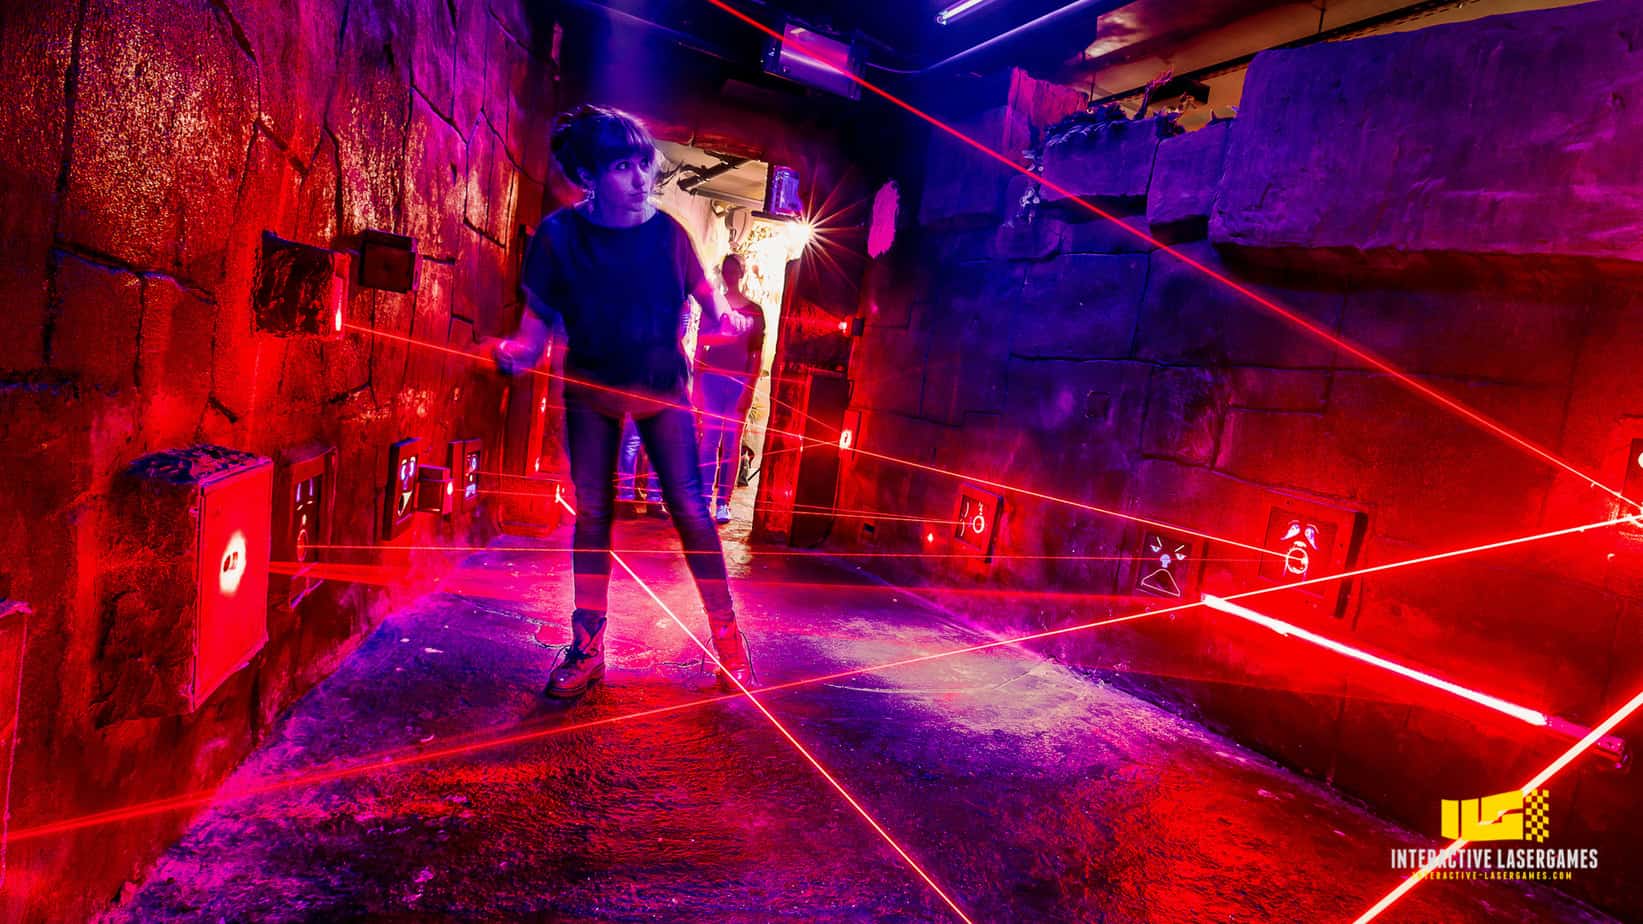 3D lasertag game in Salou from 12€ 